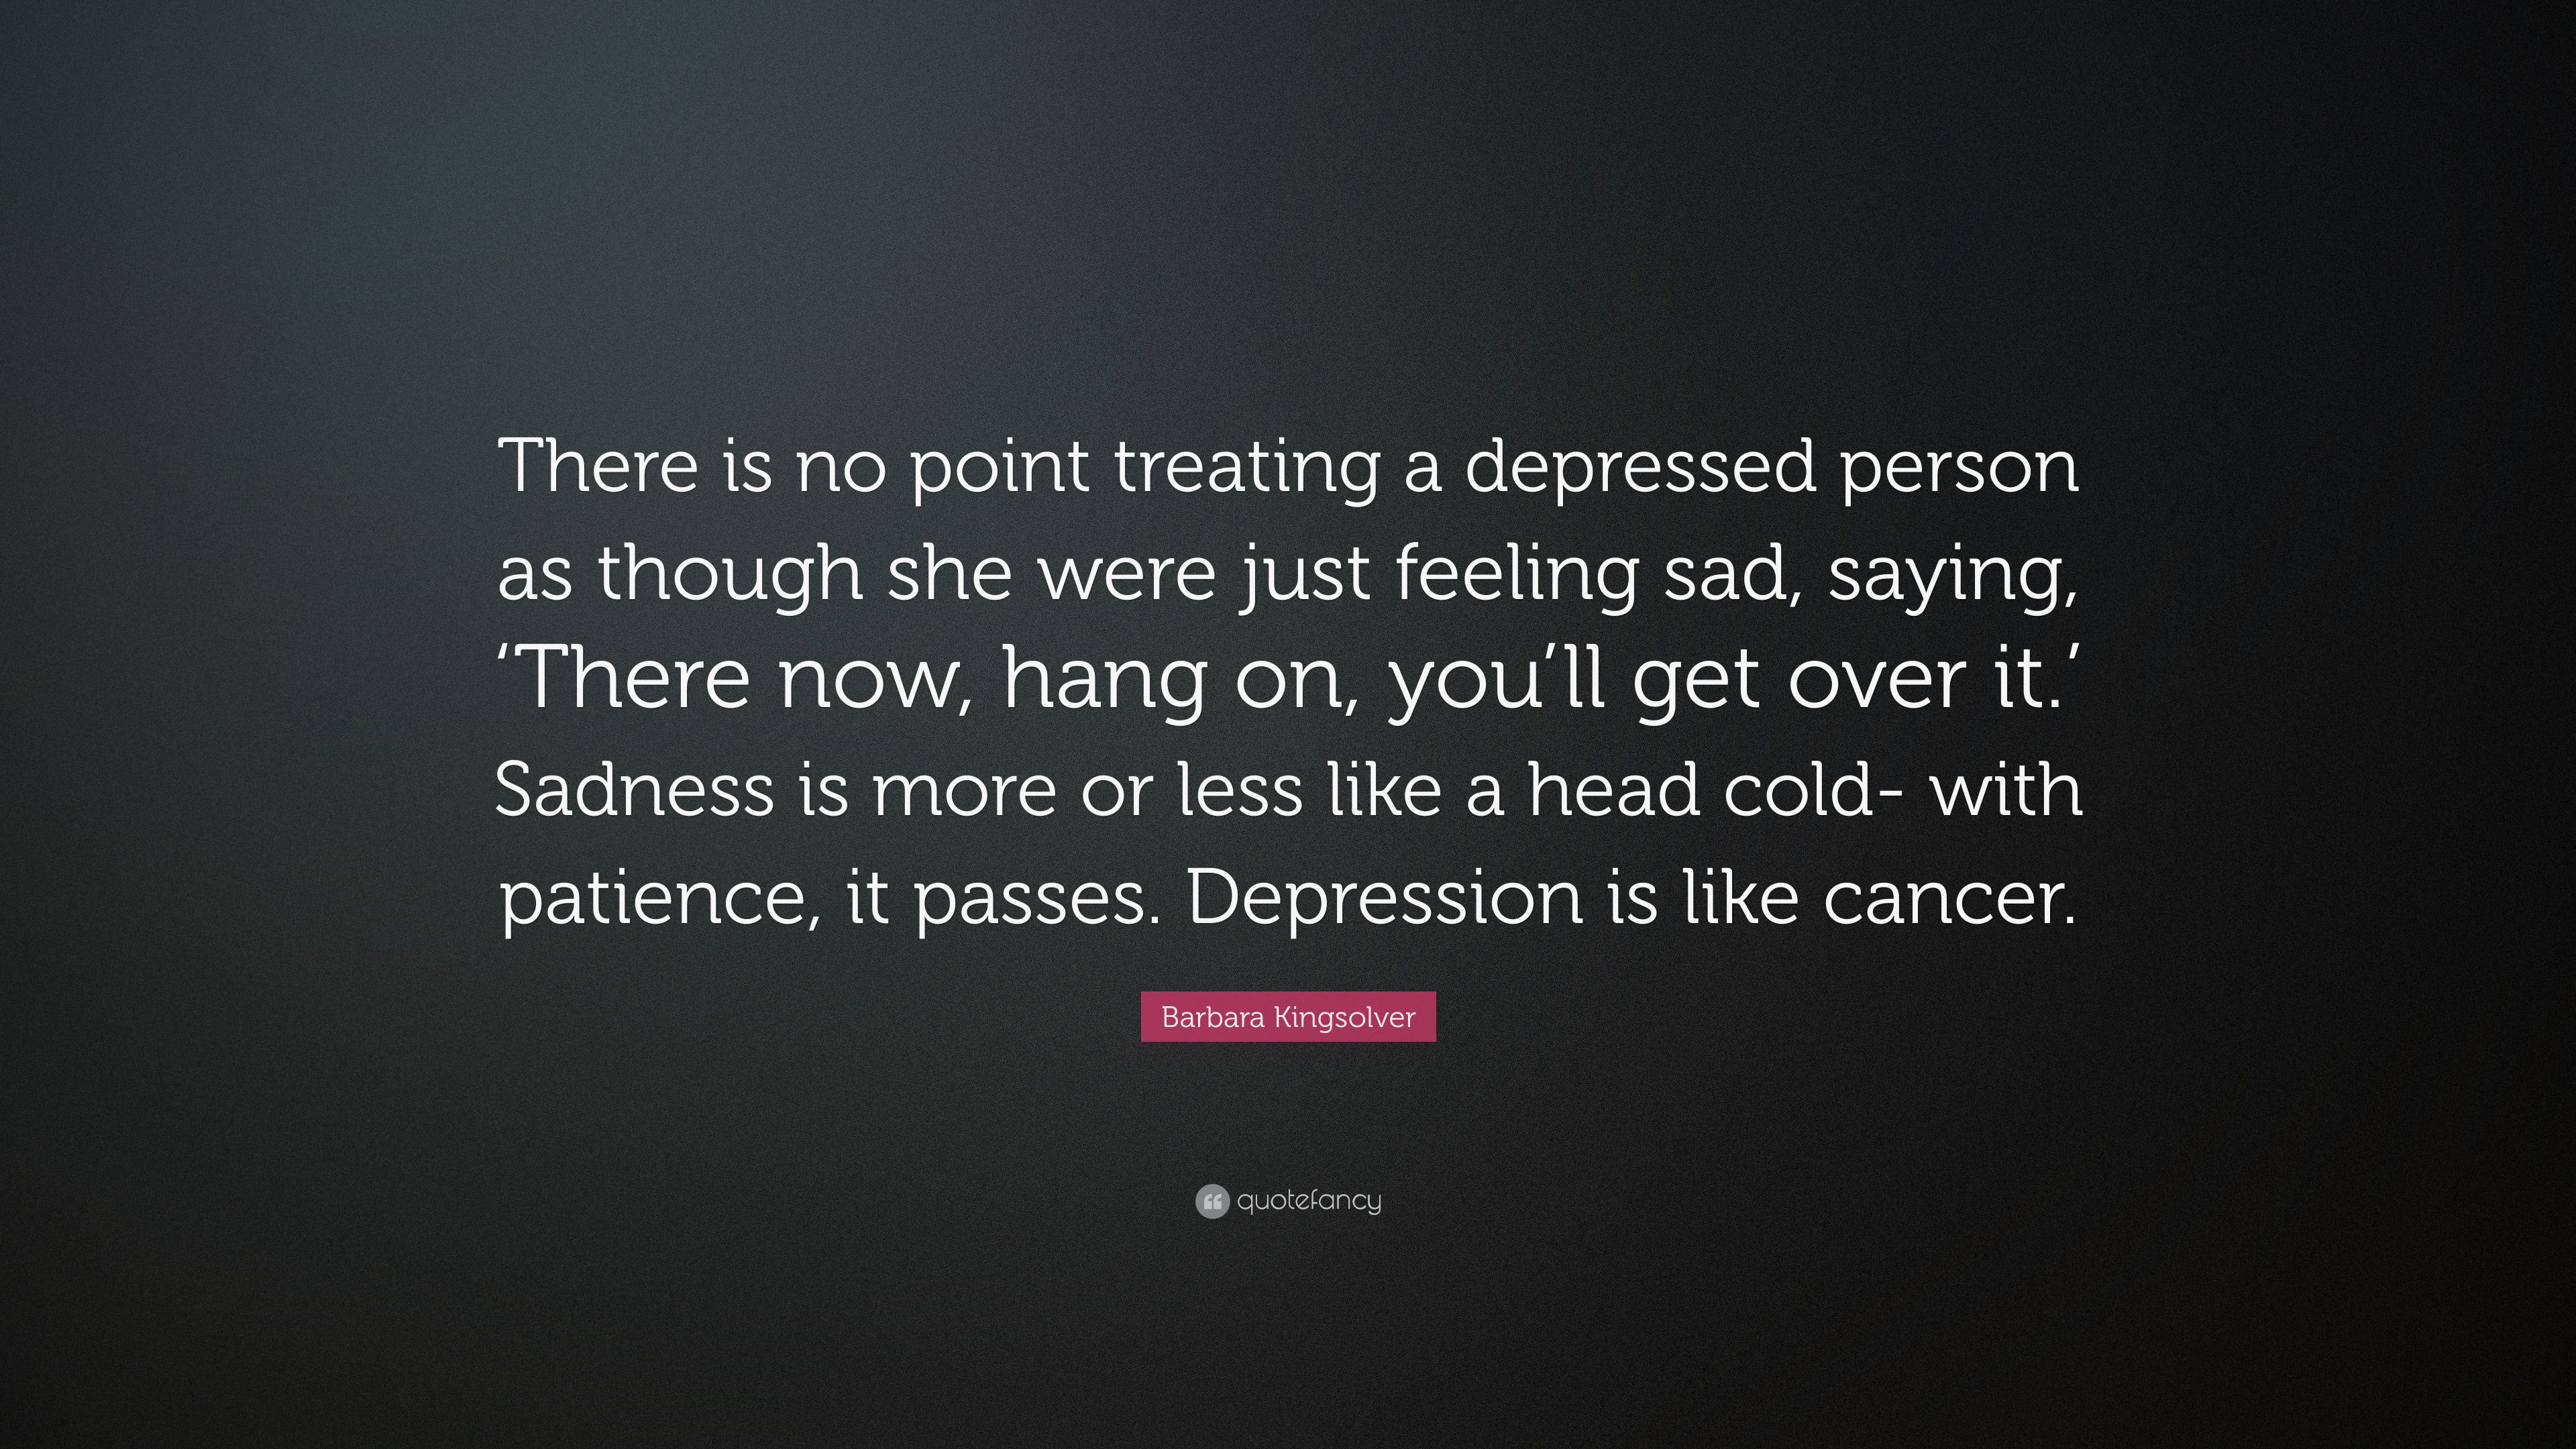 Barbara Kingsolver Quote: “There is no point treating a depressed person as though she were just feeling sad, saying, 'There now, hang on, you'll g.” (6 wallpaper)